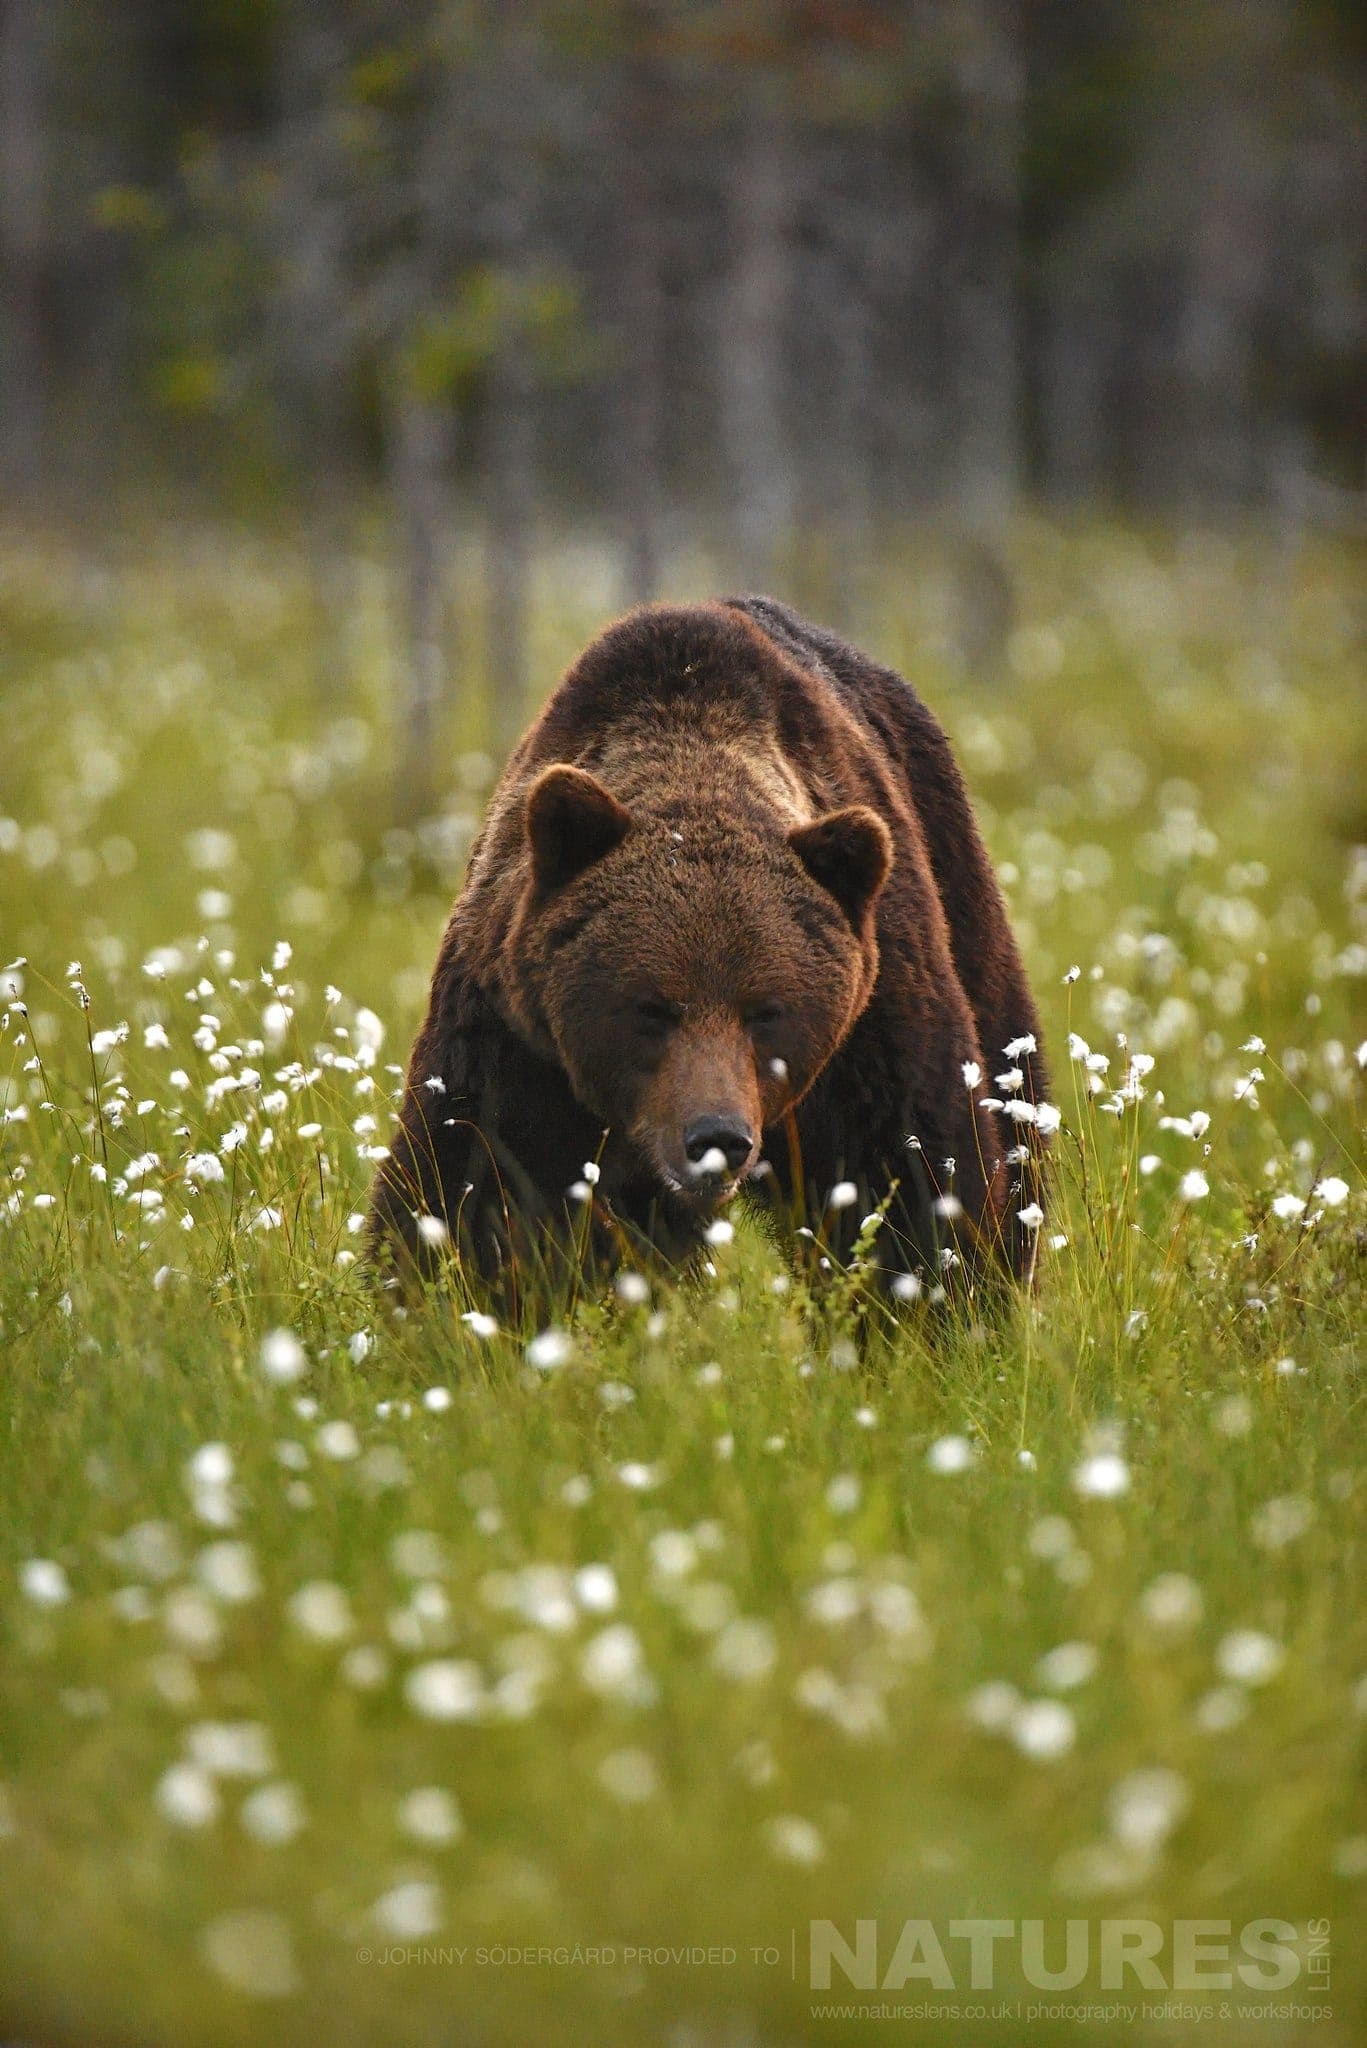 One Of The Large Bears Rim Amongst The Cotton Grass Photographed By Johnny Södergård During The Natureslens Wild Brown Bears Of Finland Photography Holiday